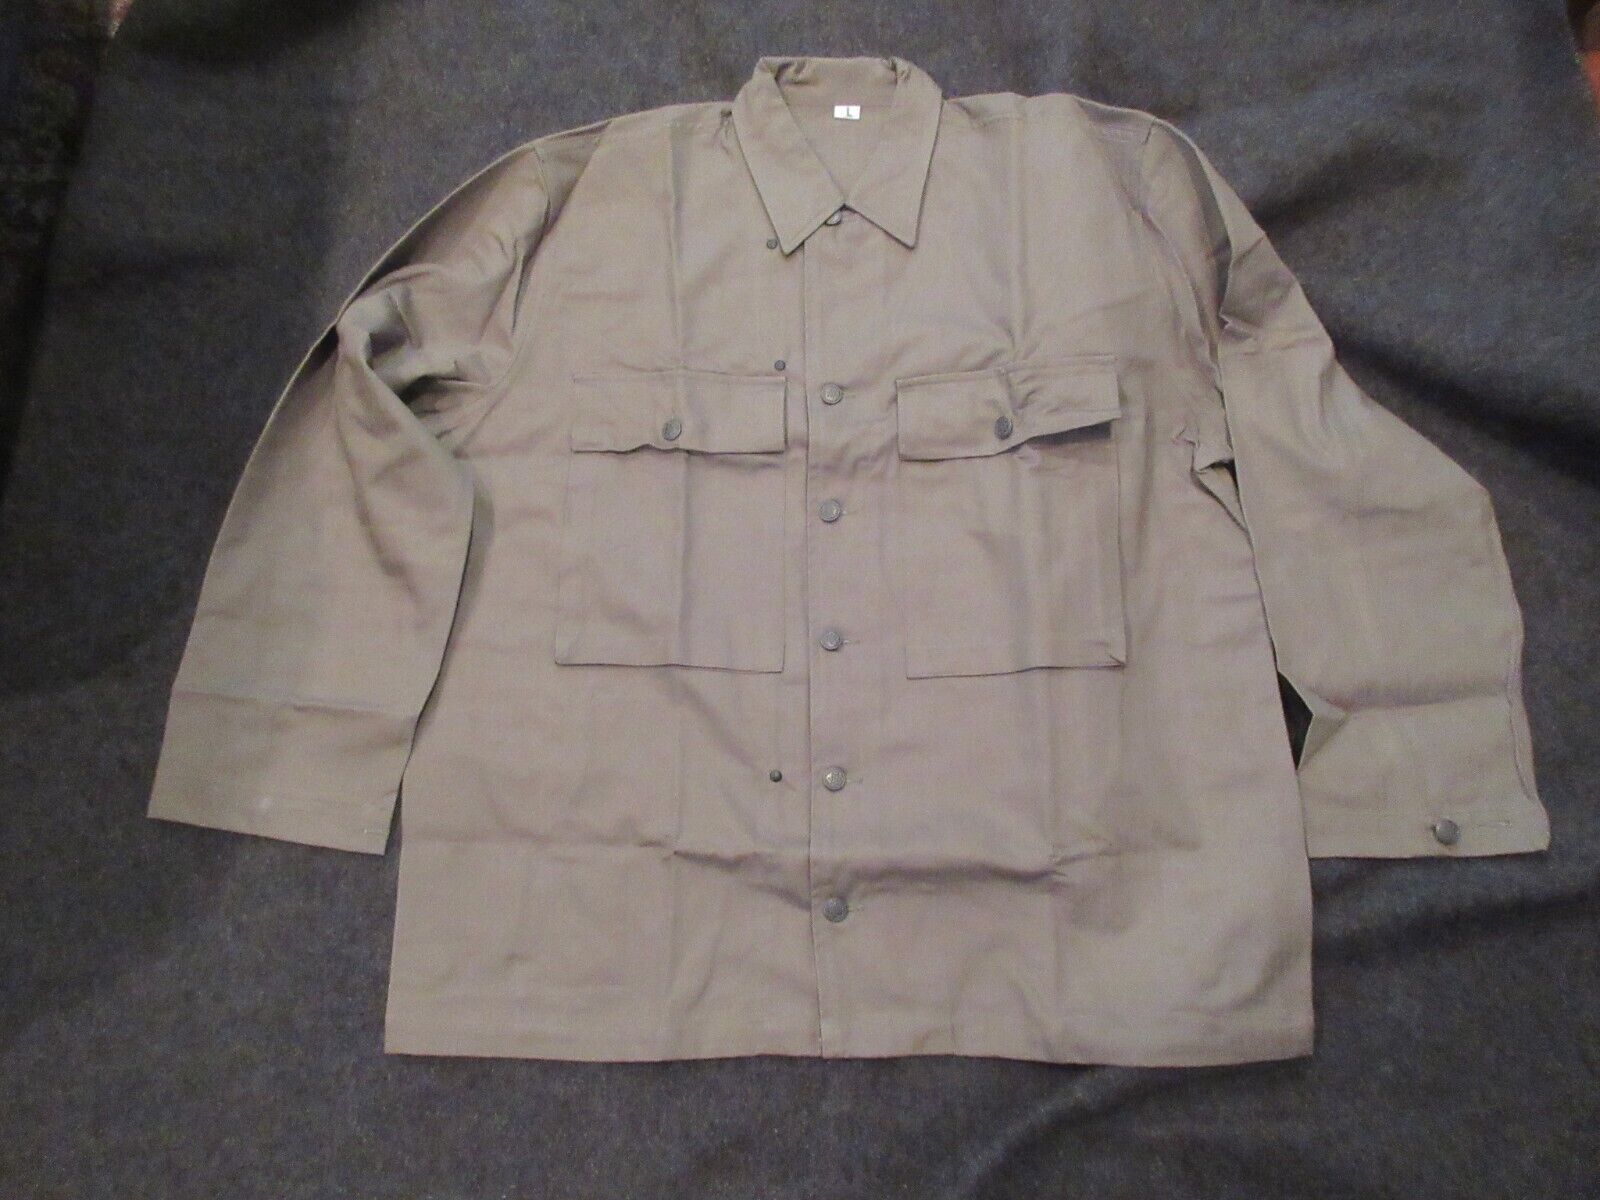 REPRO US ARMY WW2 HBT SHIRT AT THE FRONT SIZE LARGE LIGHT SHADE NEW